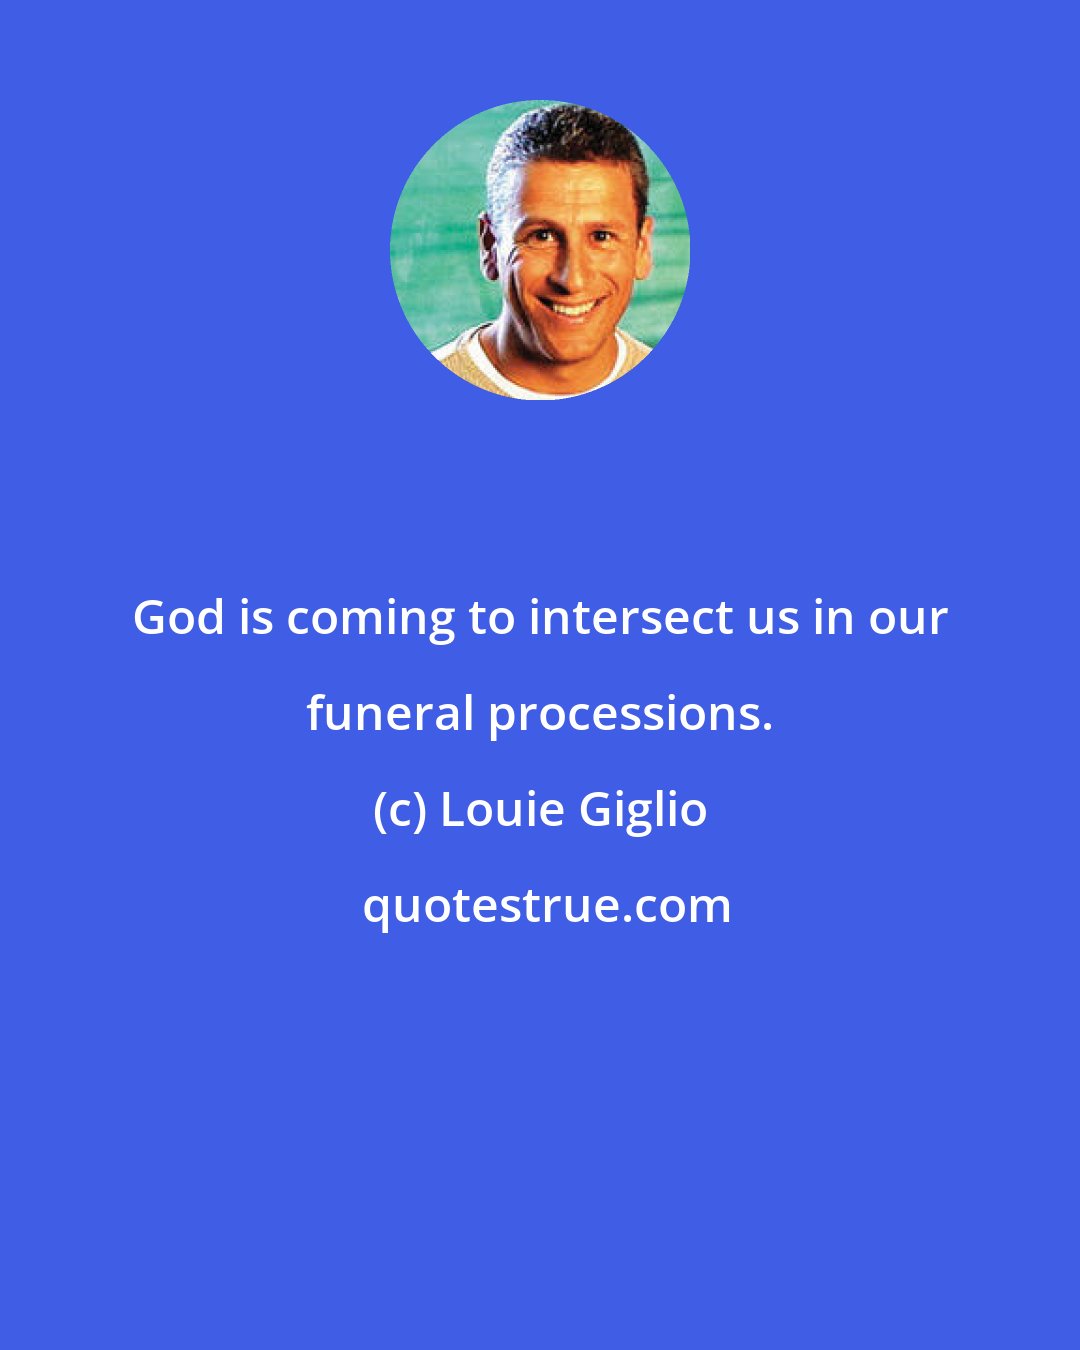 Louie Giglio: God is coming to intersect us in our funeral processions.